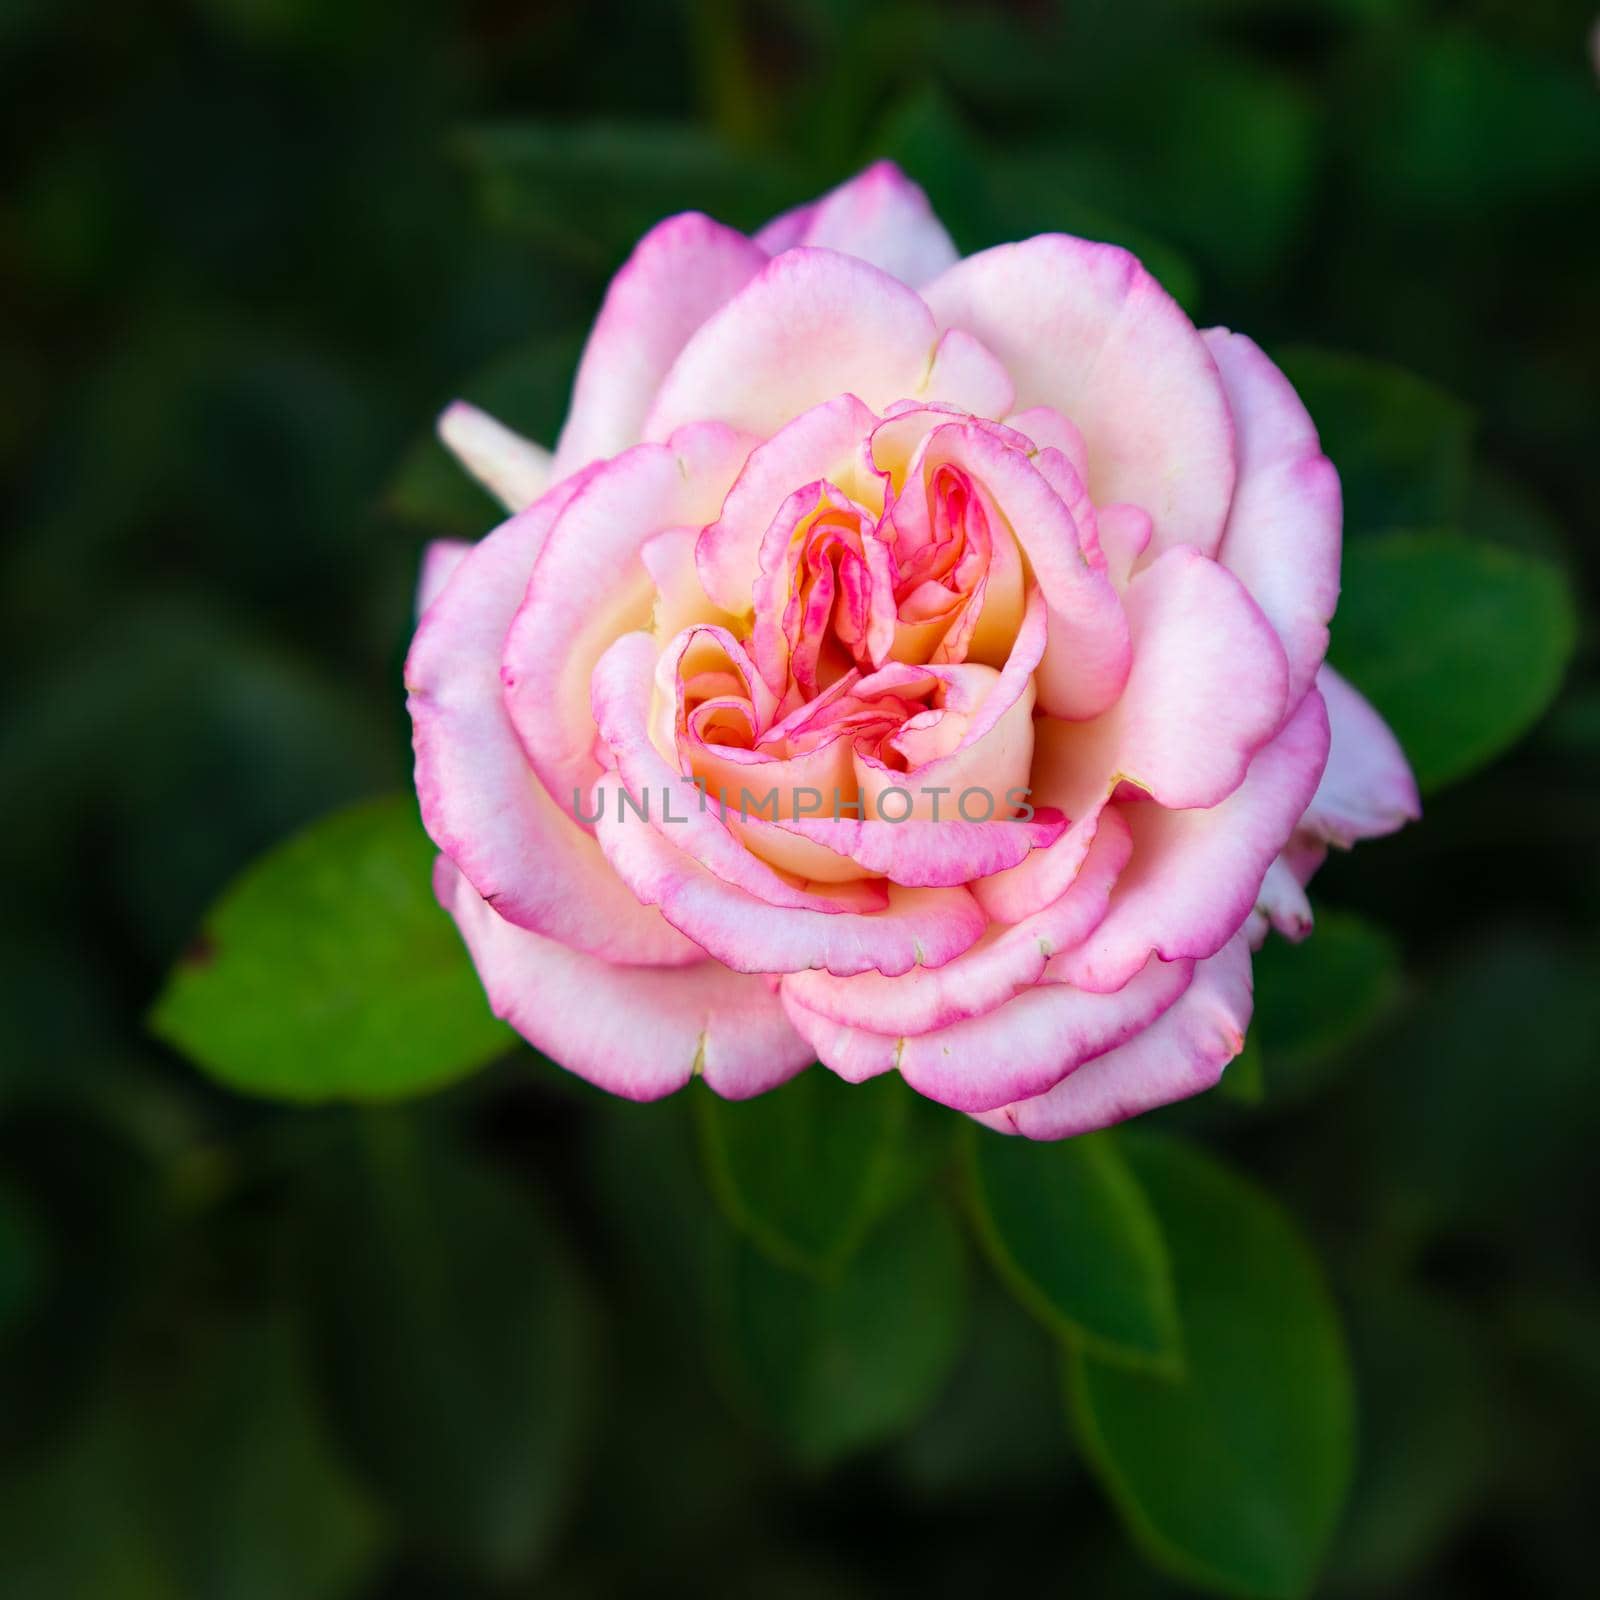 Bud of a pink rose in the garden with blurred bushes in the background. Shallow depth of field. Top view.